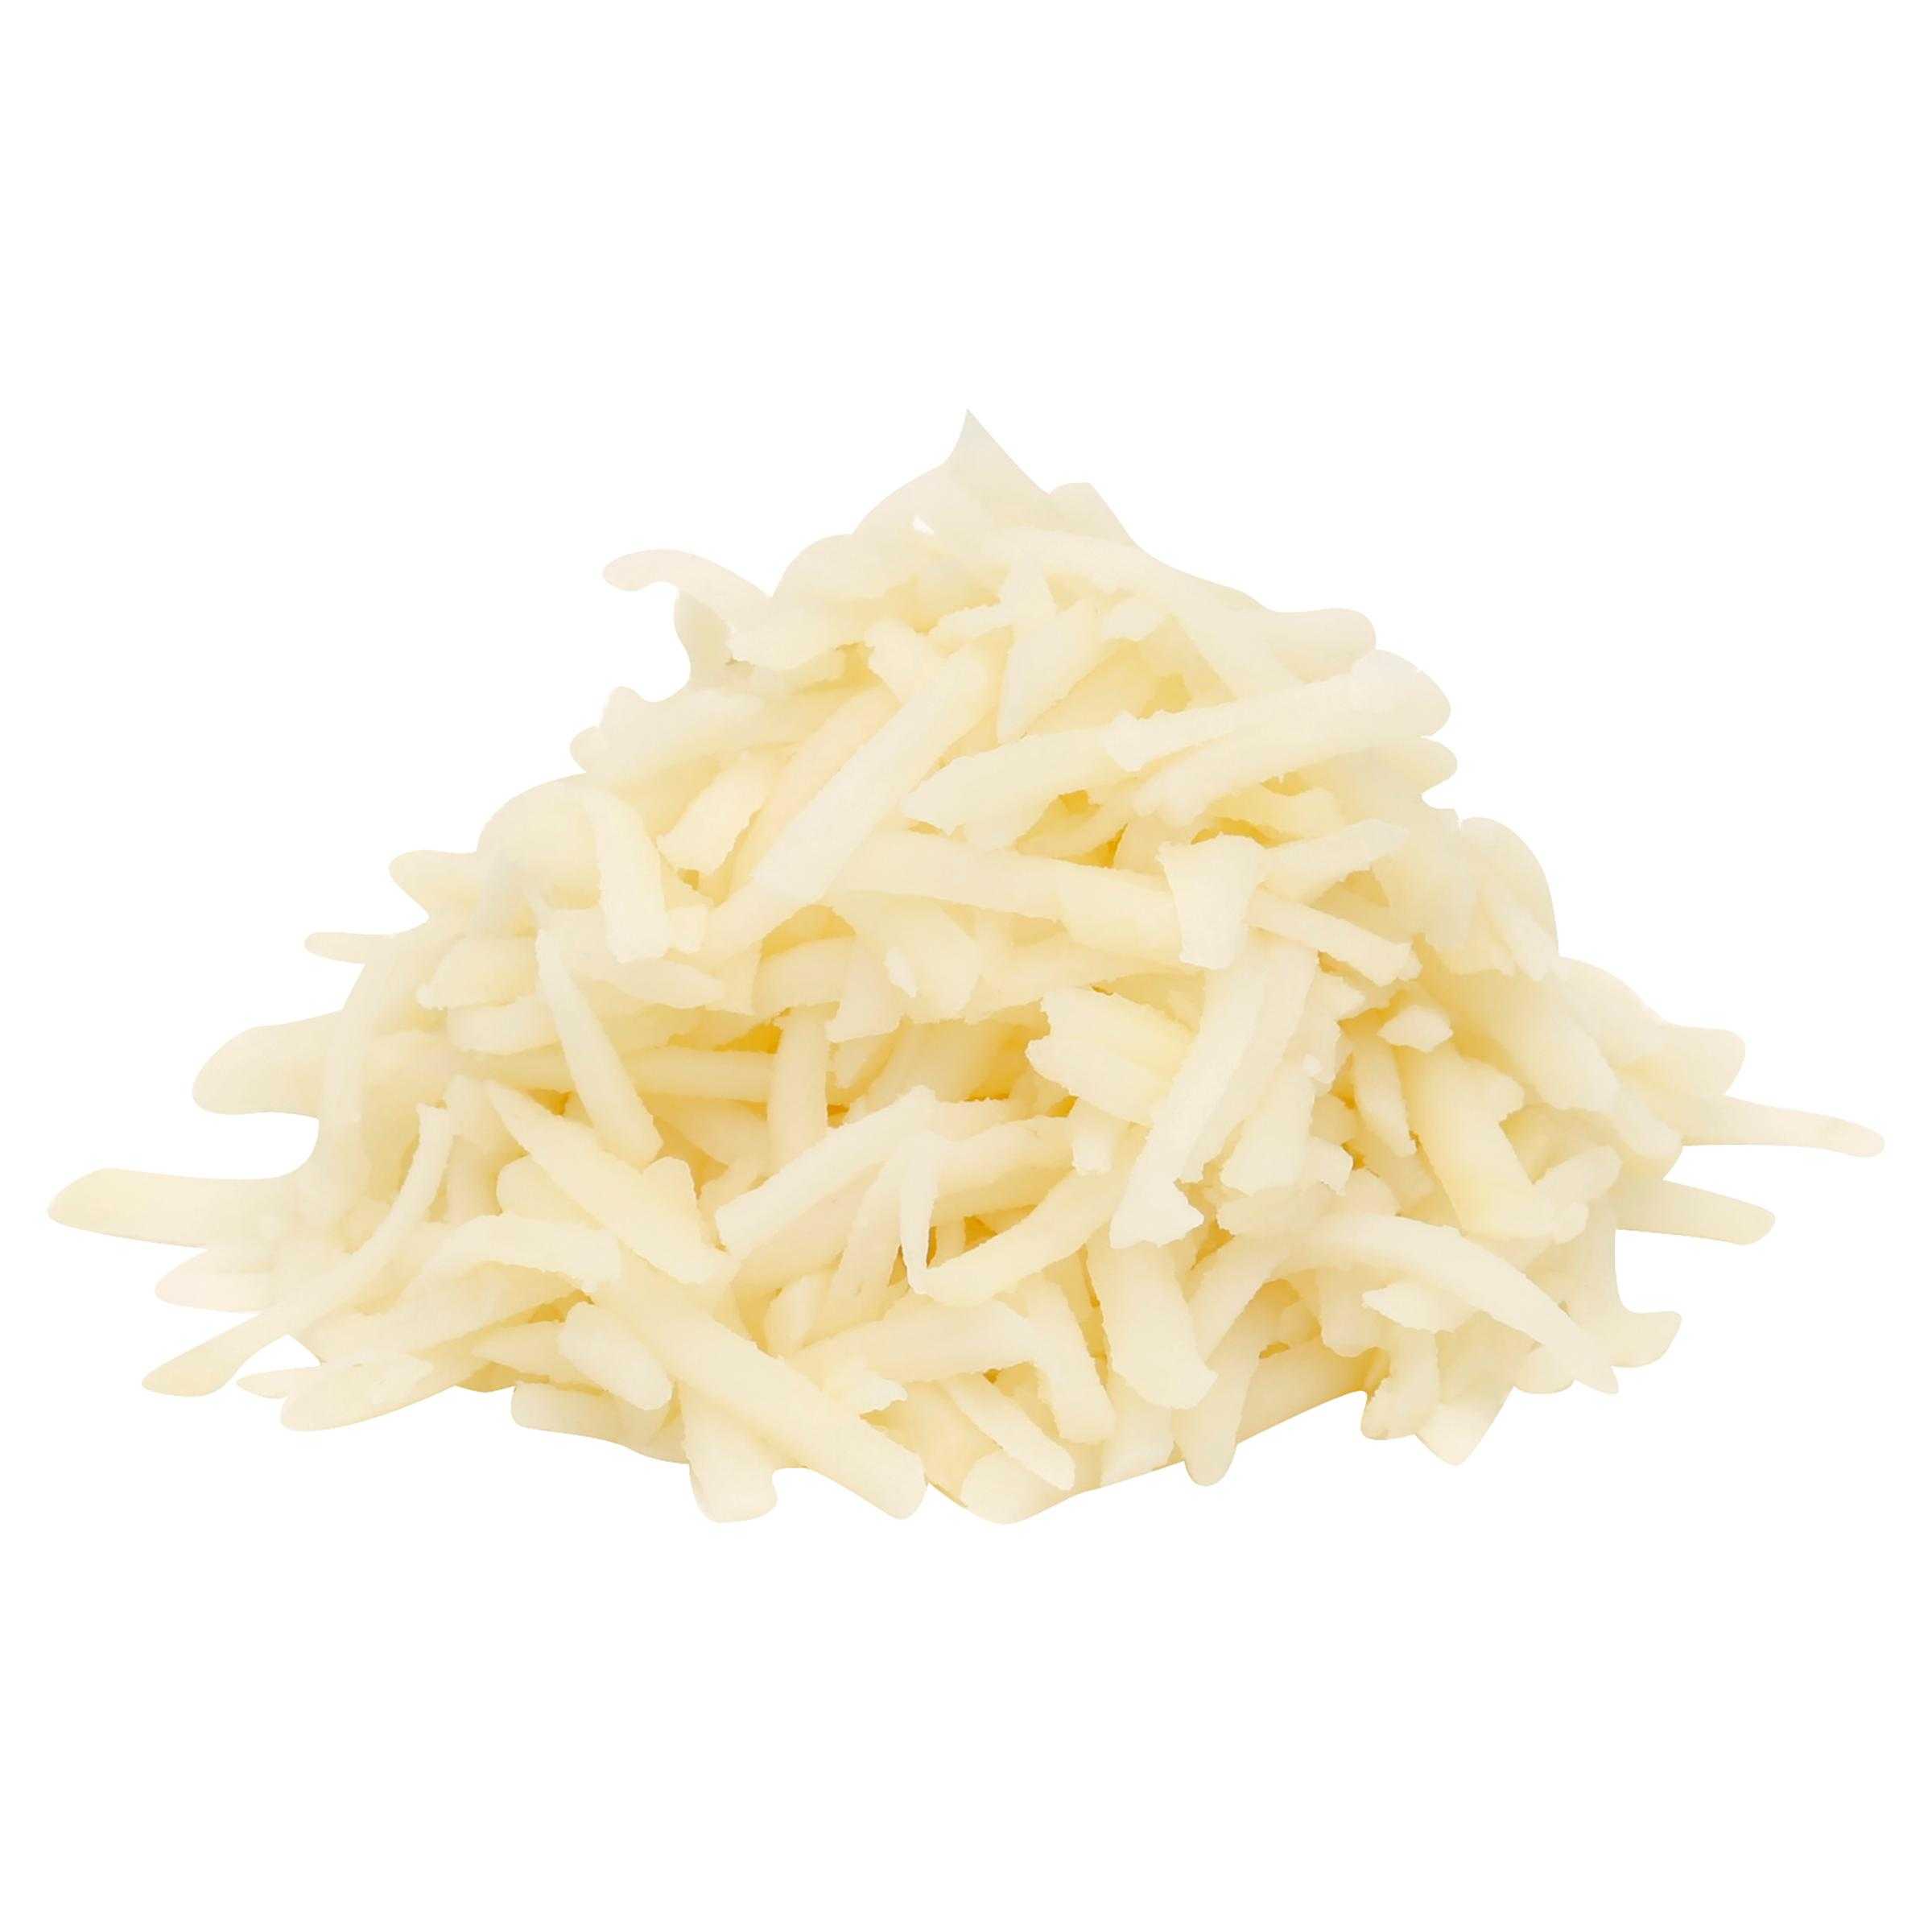 Simply Potatoes® Refrigerated Shredded Hash Browns made with peeled Russet potatoes shredded 3/16″ wide, 2/10 Lb Bags